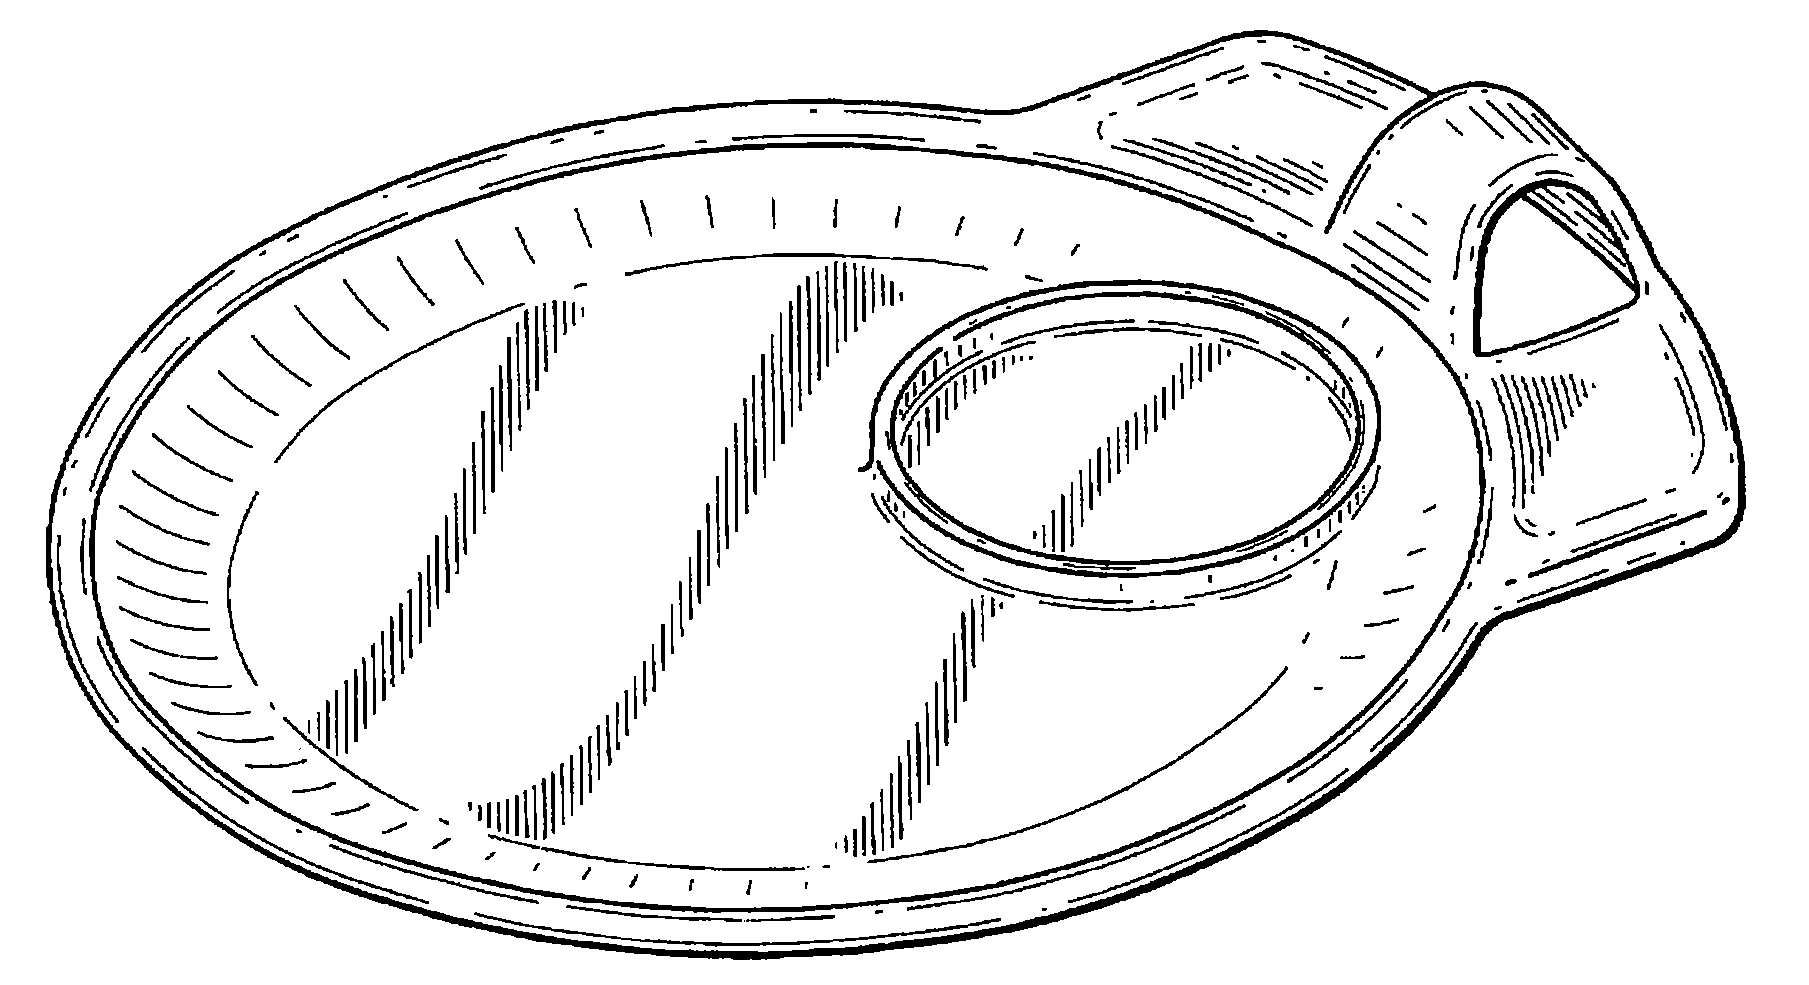 Example of a design for a compartmented food server.
